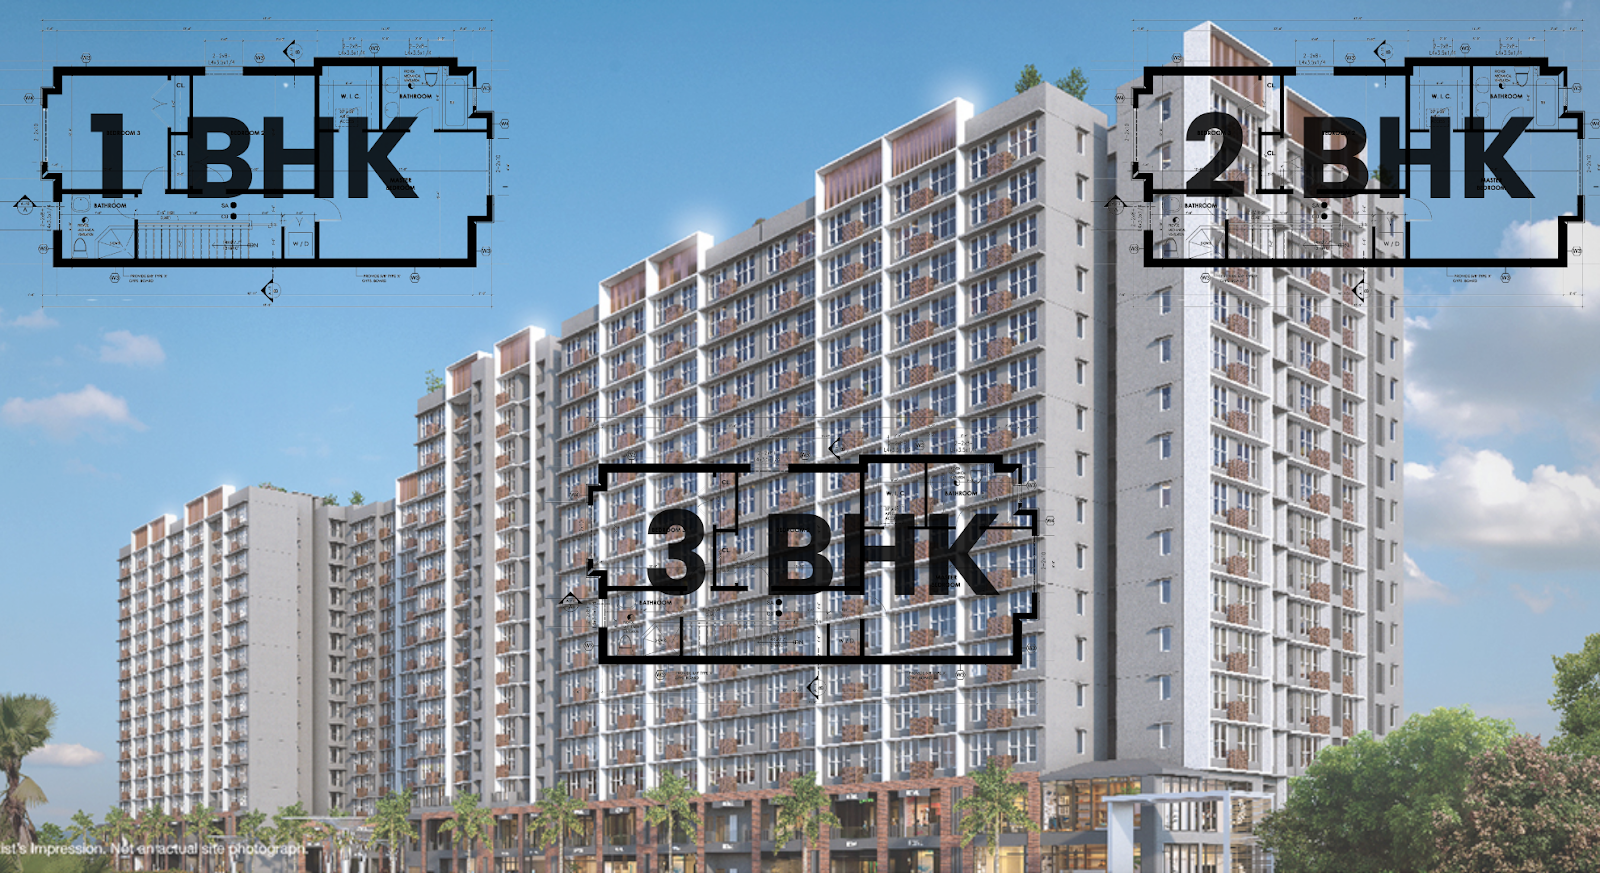 1, 2 & 3BHK with modern living space available at attractive prices.